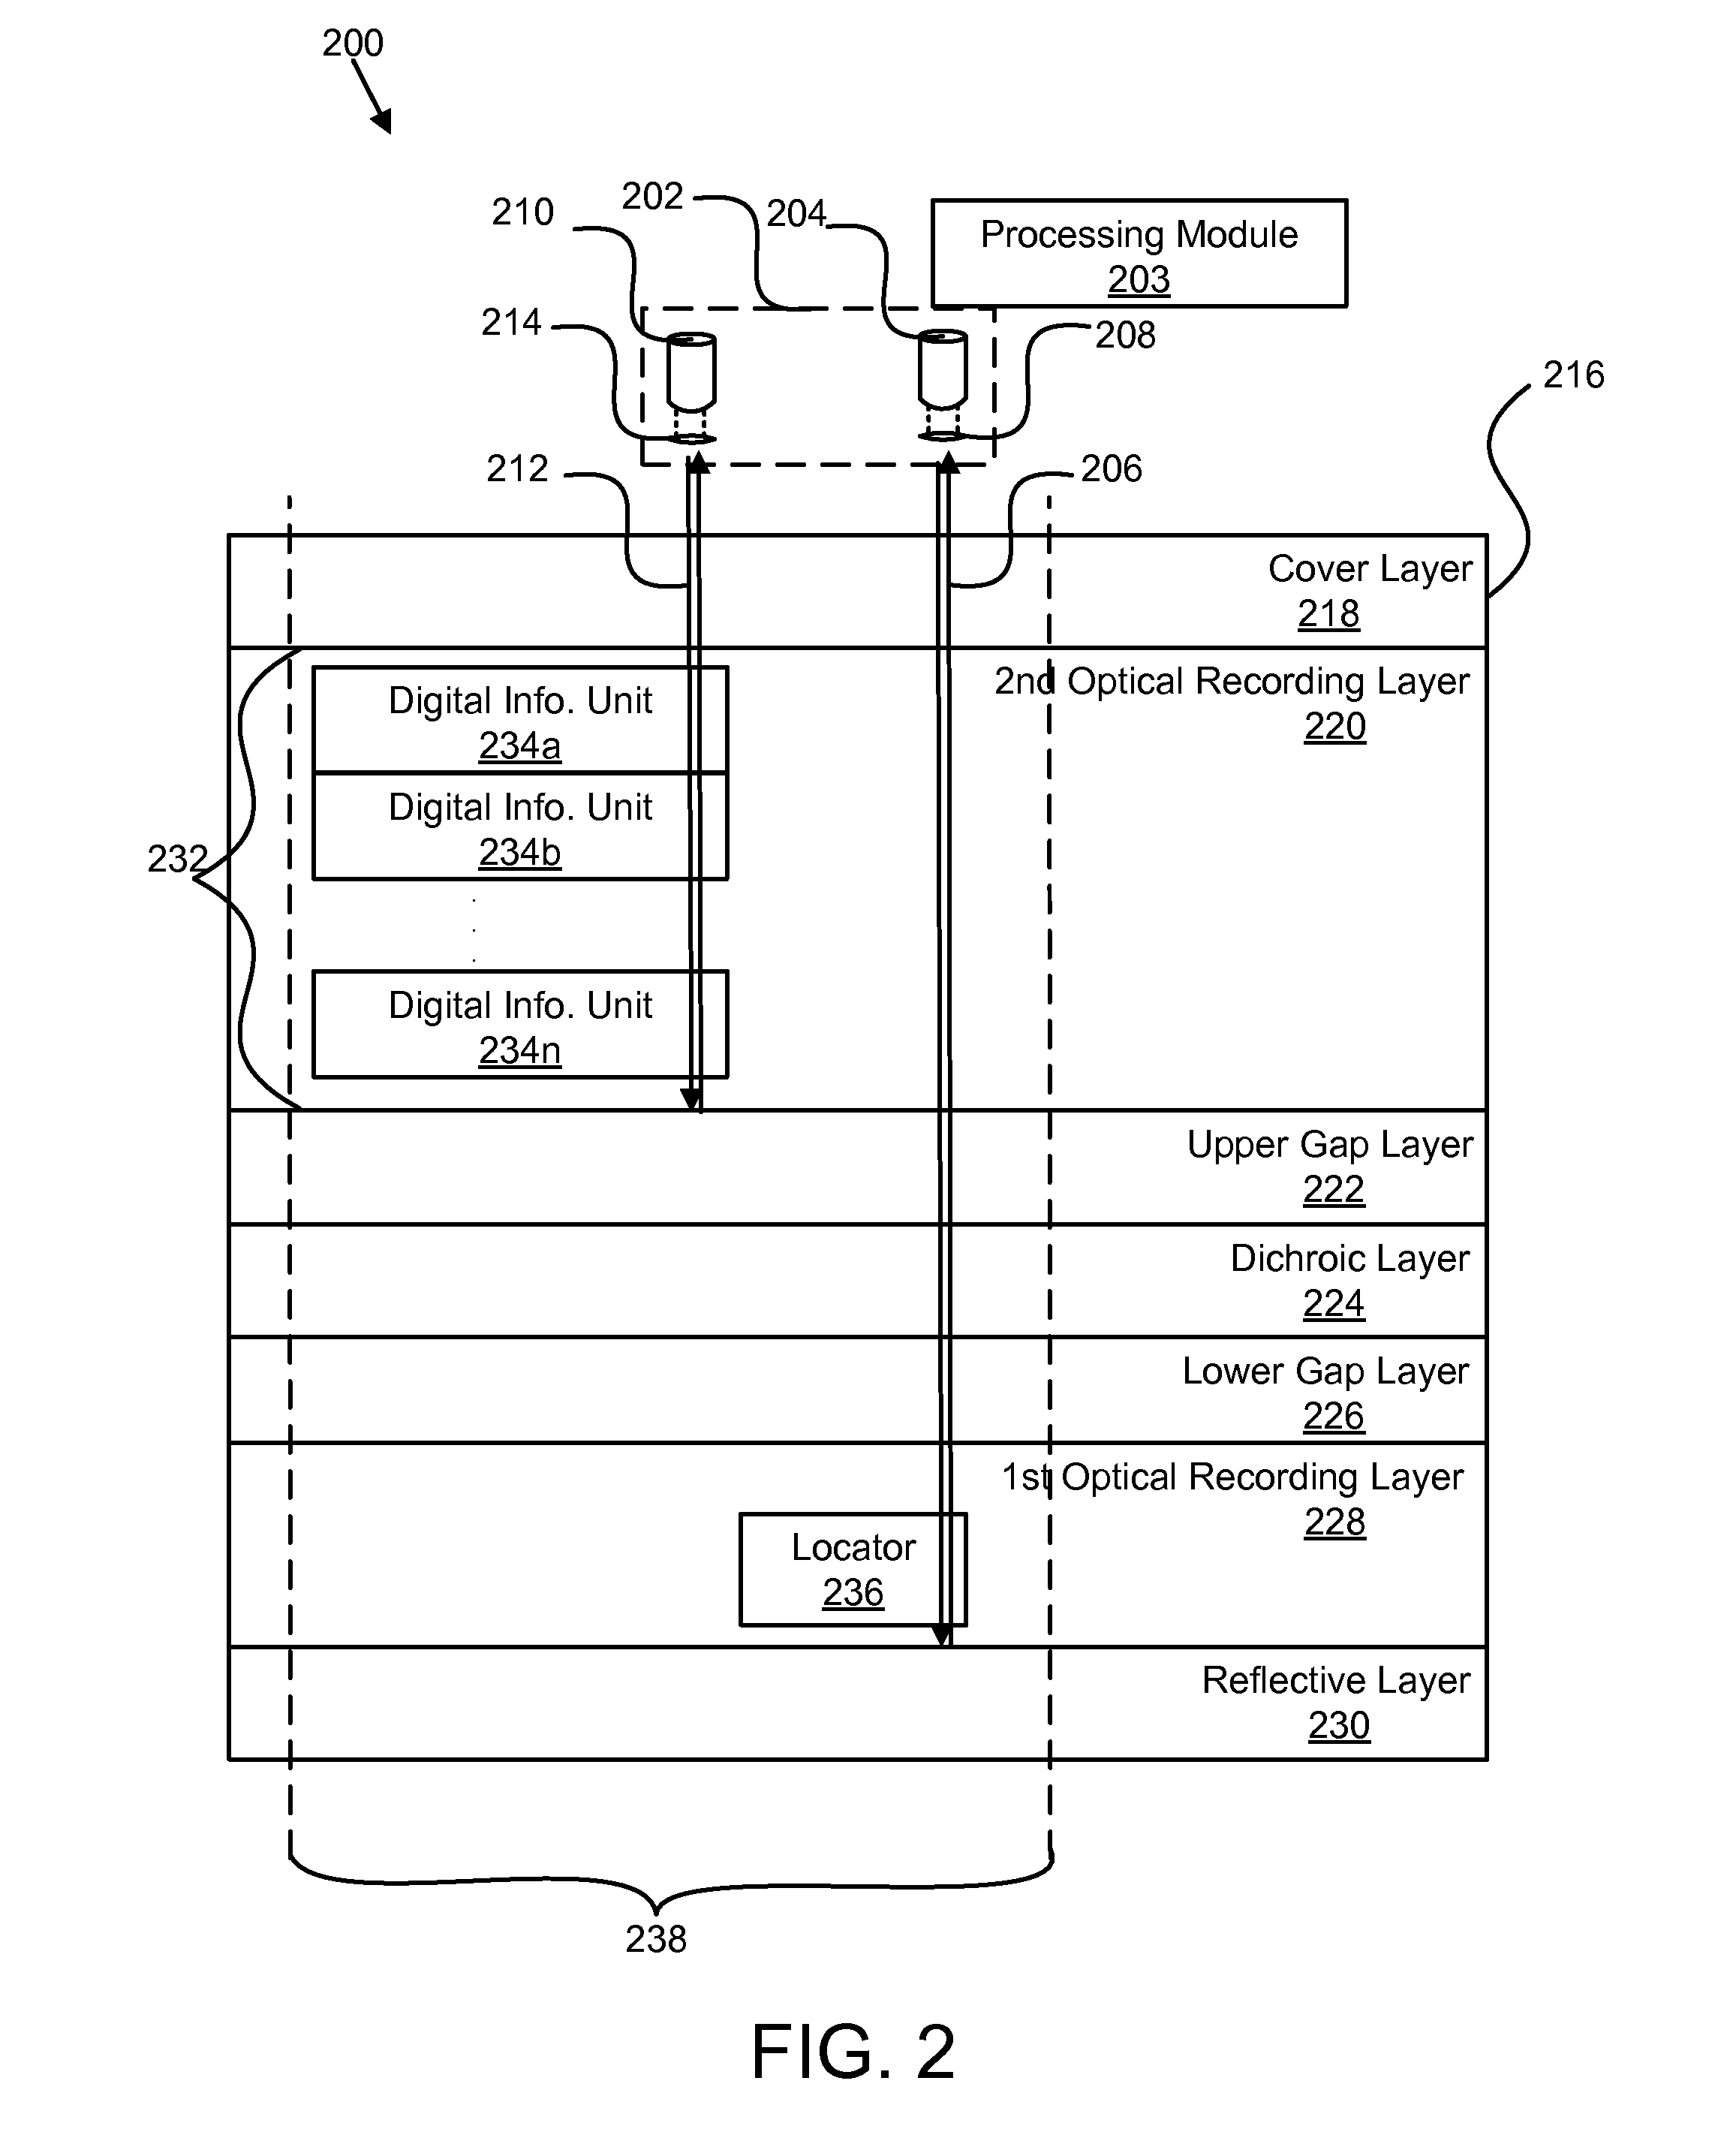 Apparatus, system, and method for locating and fast-searching units of digital information in volume, optical-storage disks